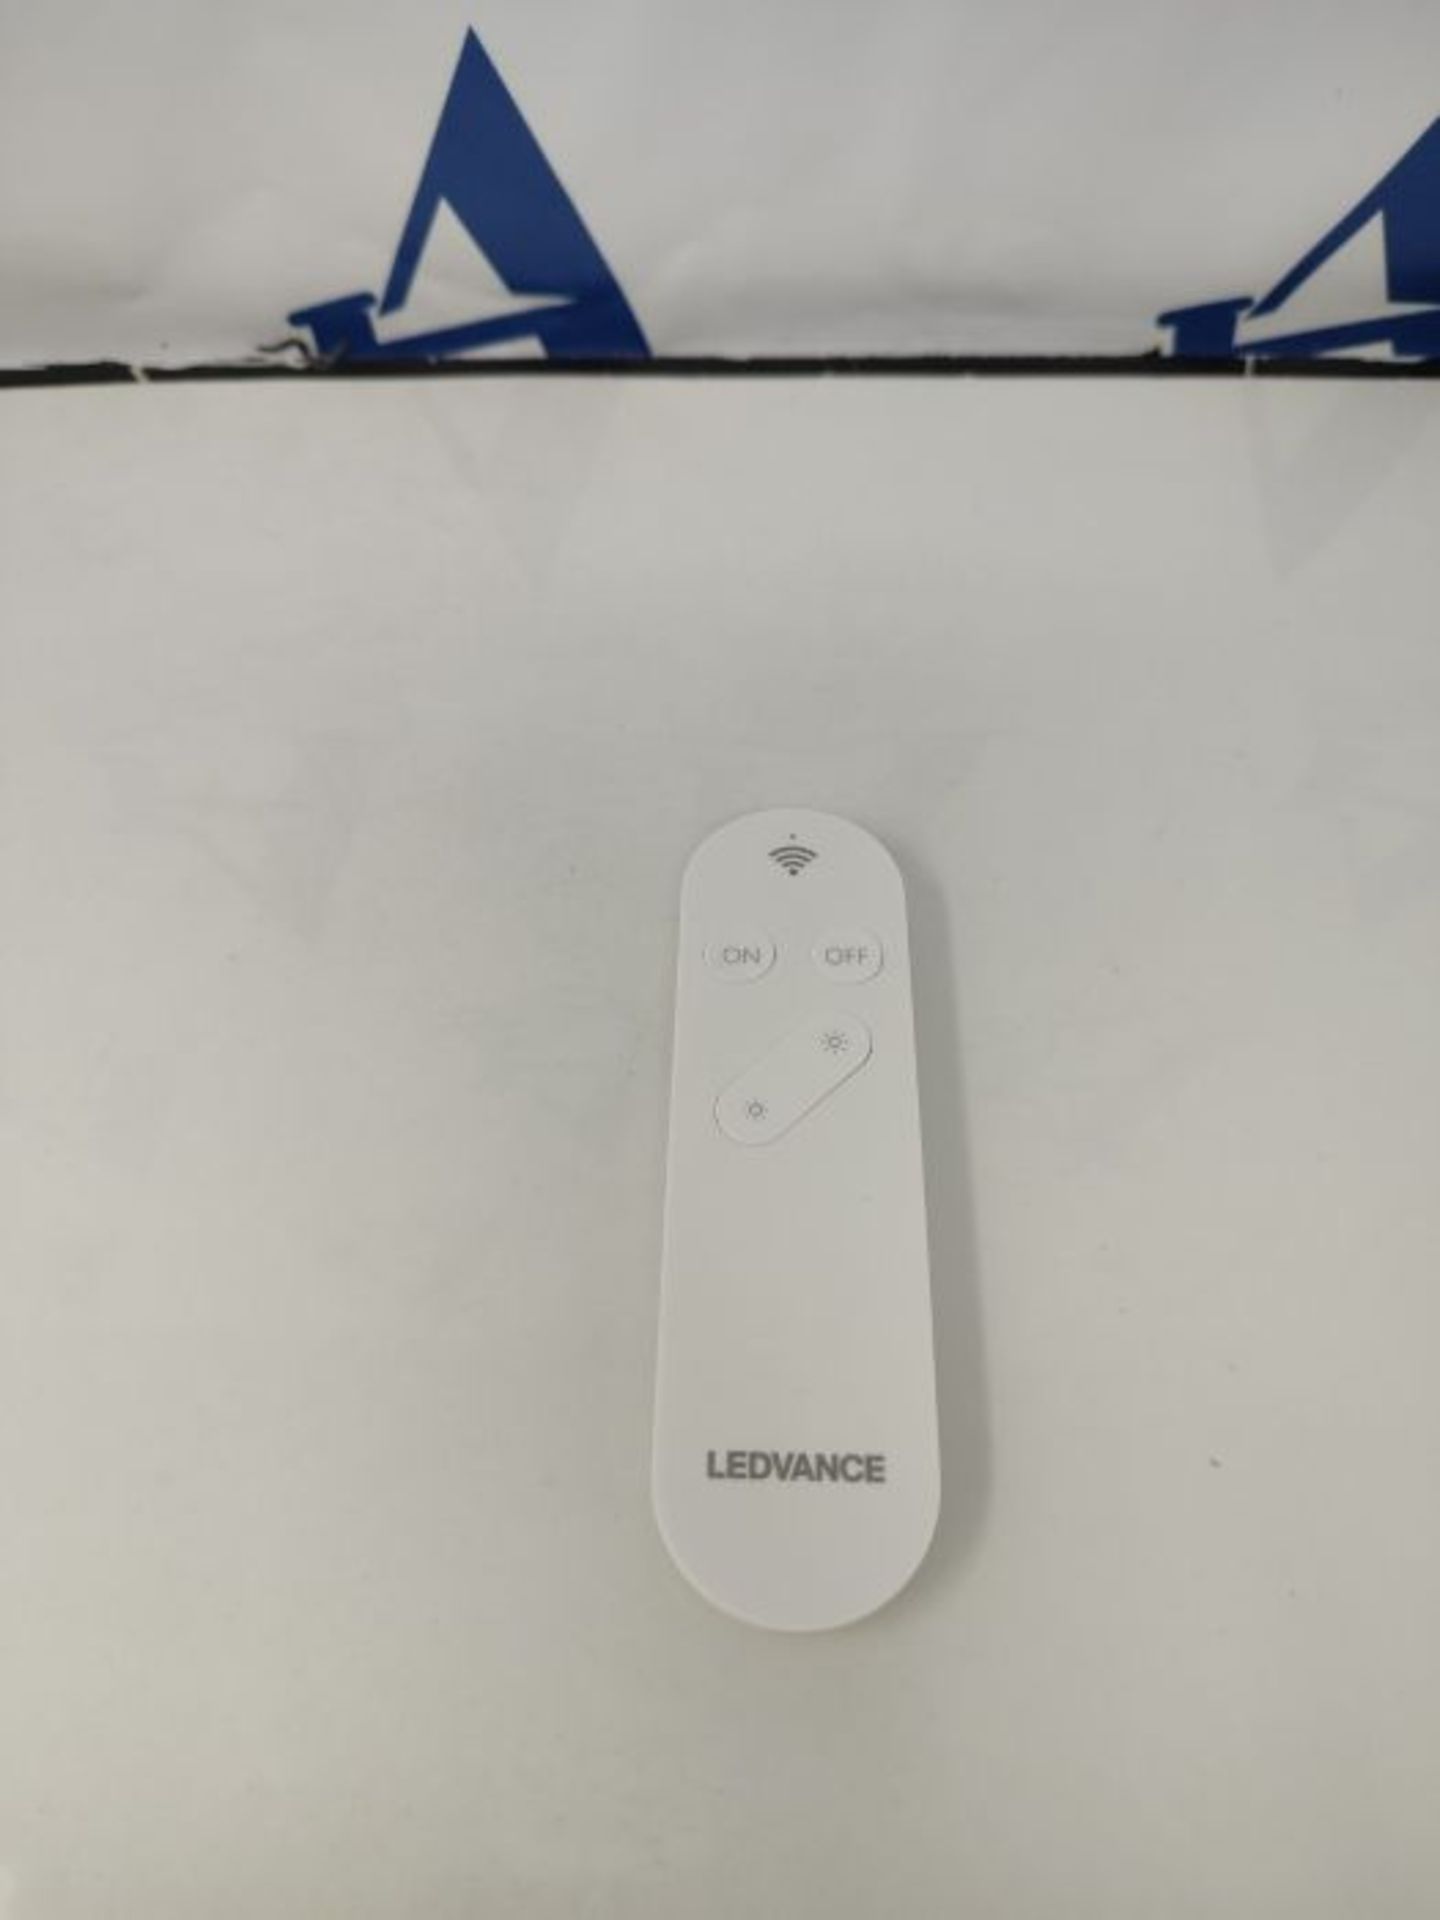 LEDVANCE SMART+ remote control with WiFi technology to control and dim compatible SMAR - Image 3 of 3